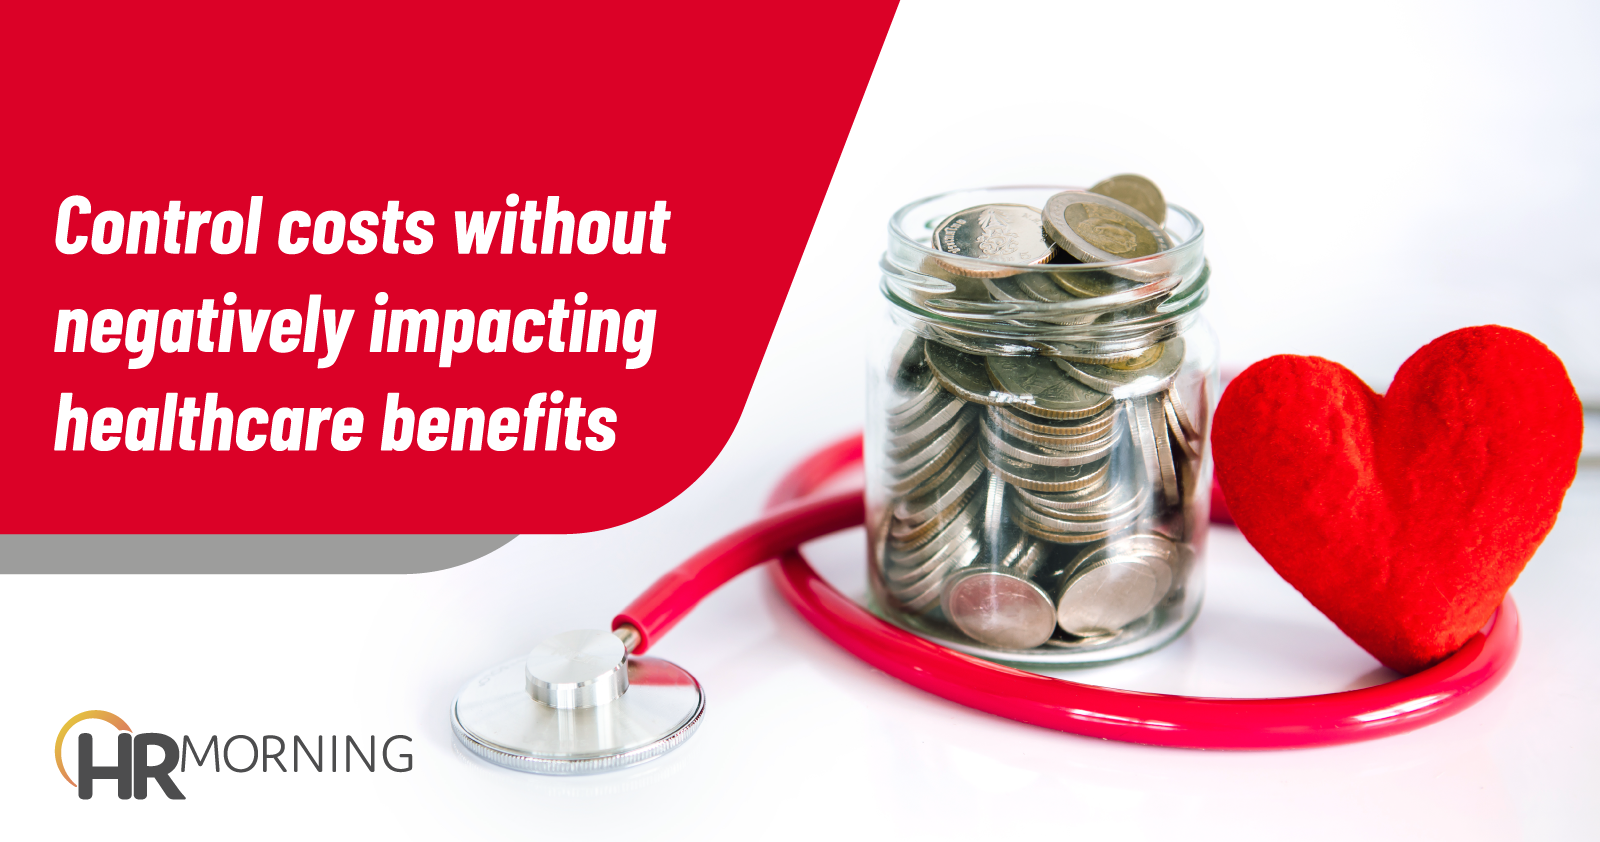 Control Costs Without Negatively Impacting Healthcare Benefits